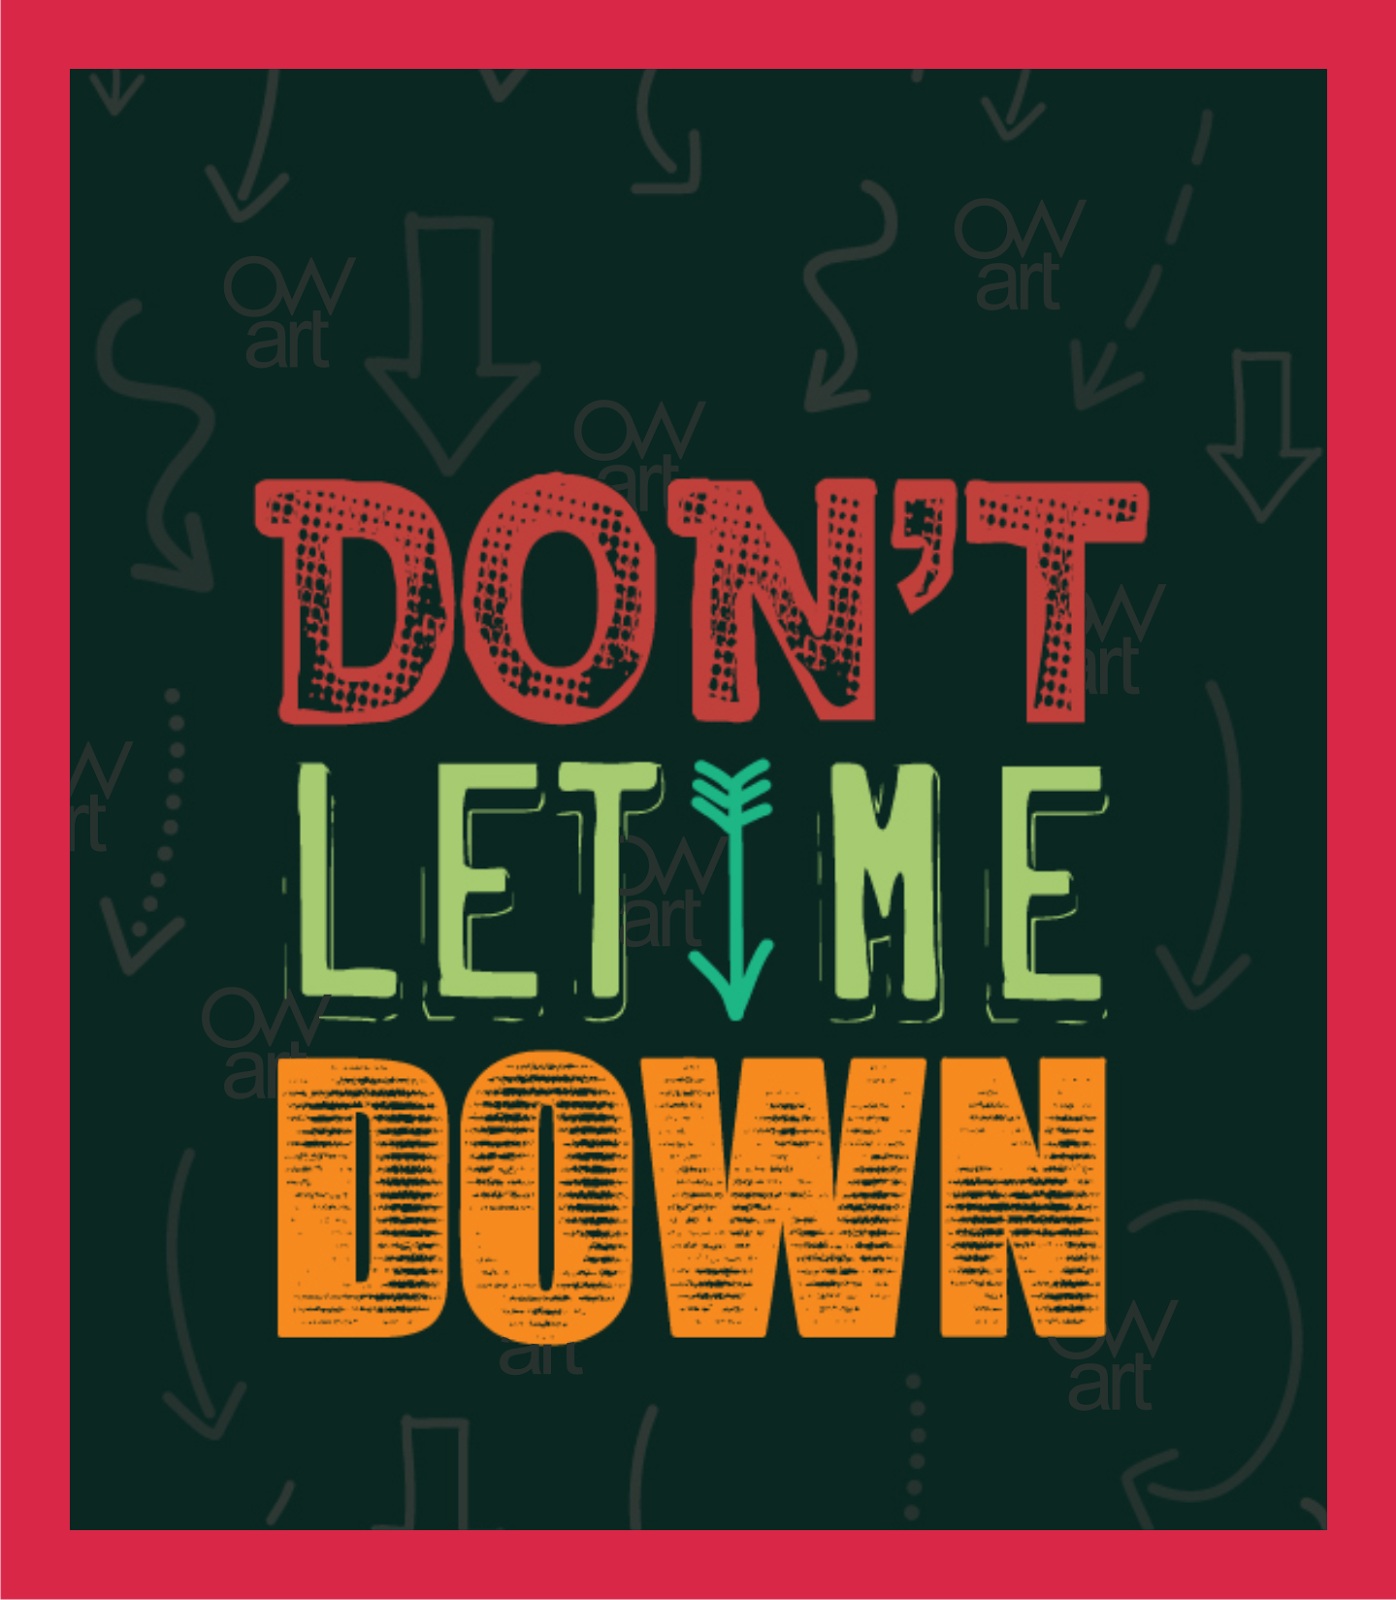 Don't Let me. The Chainsmokers Daya don't Let me down. Don't Let me down обложка. Dont me down